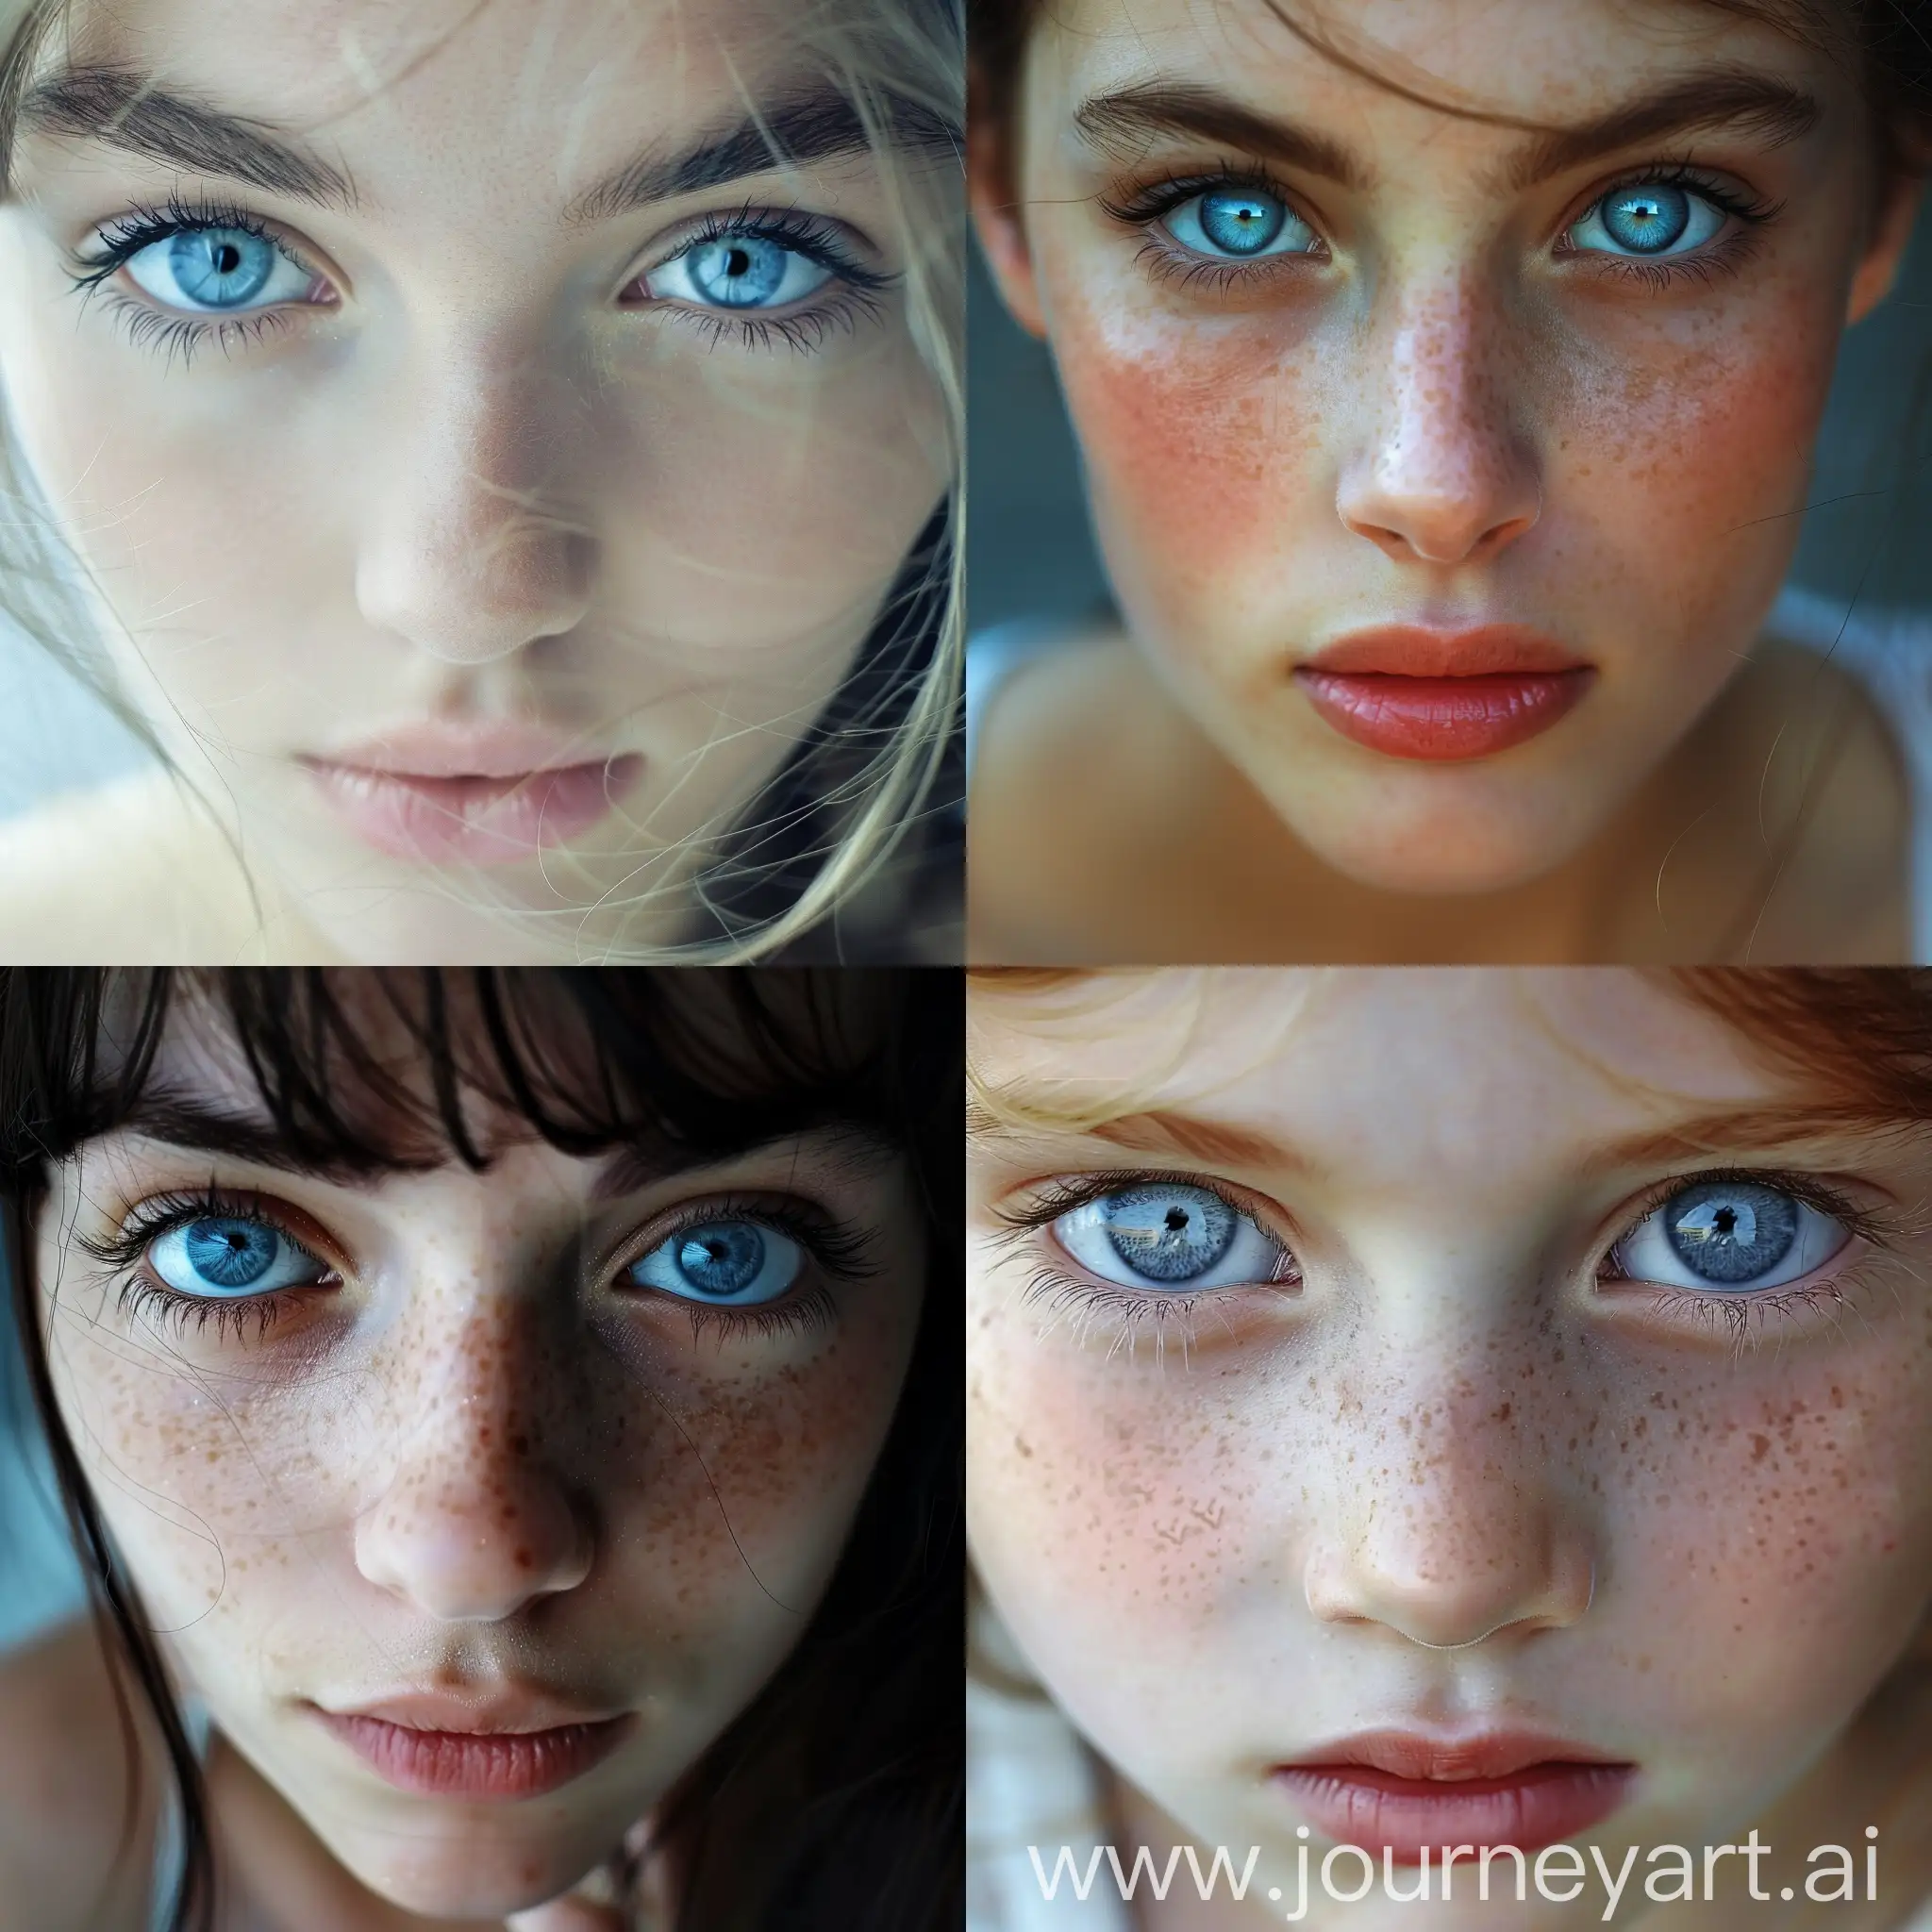 Photo of a girl face with blue eyes from the front